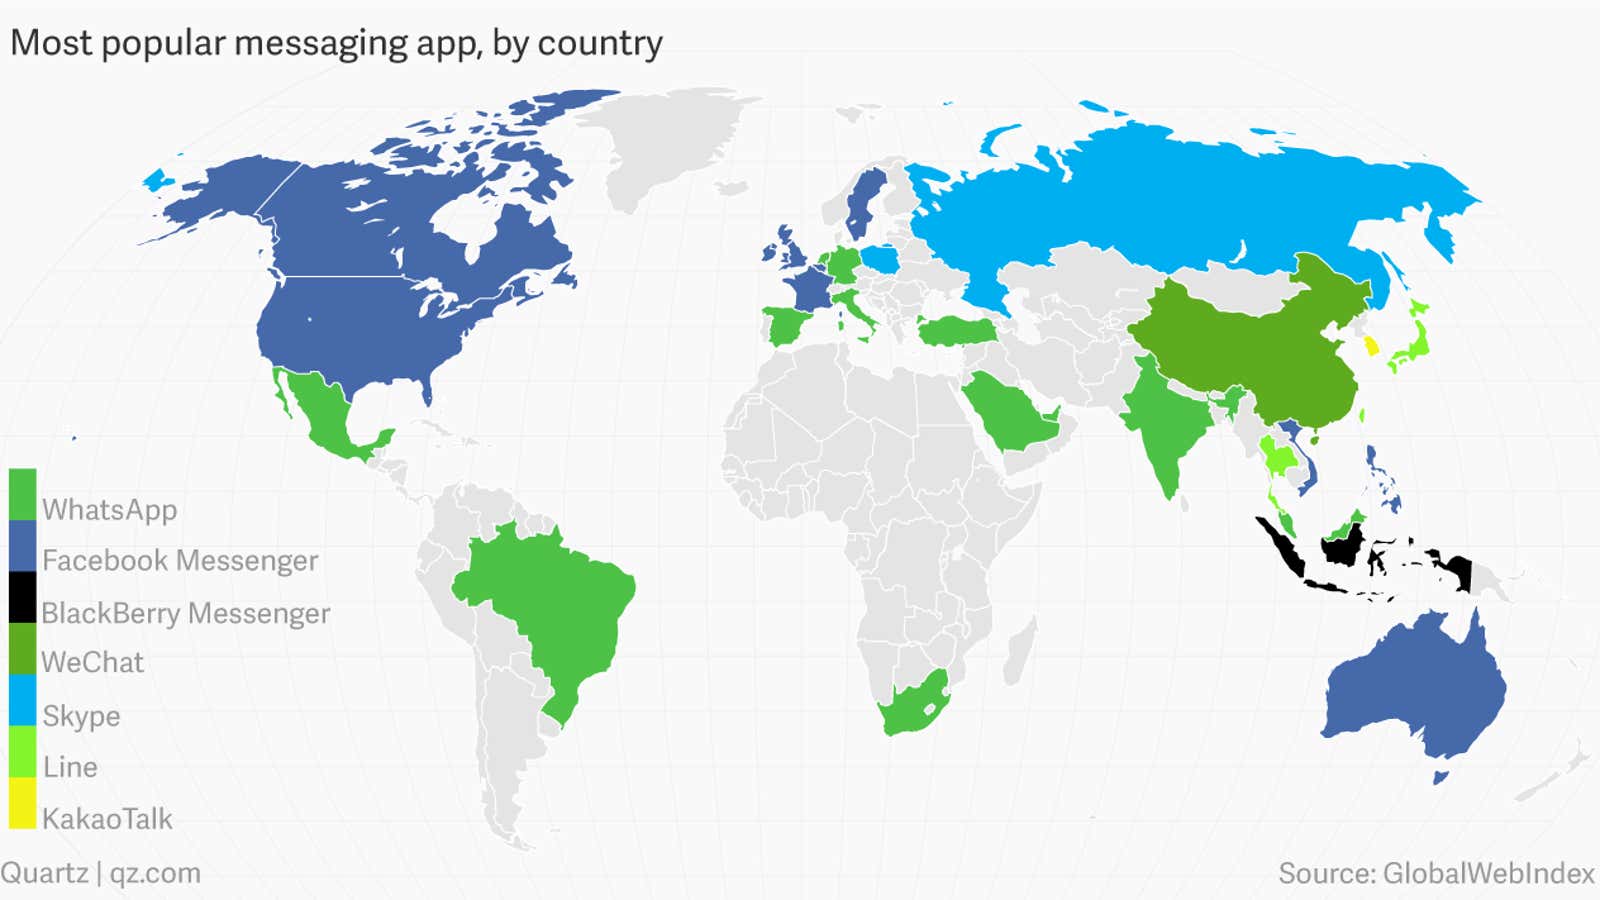 Facebook’s global dominance of messaging, in two maps